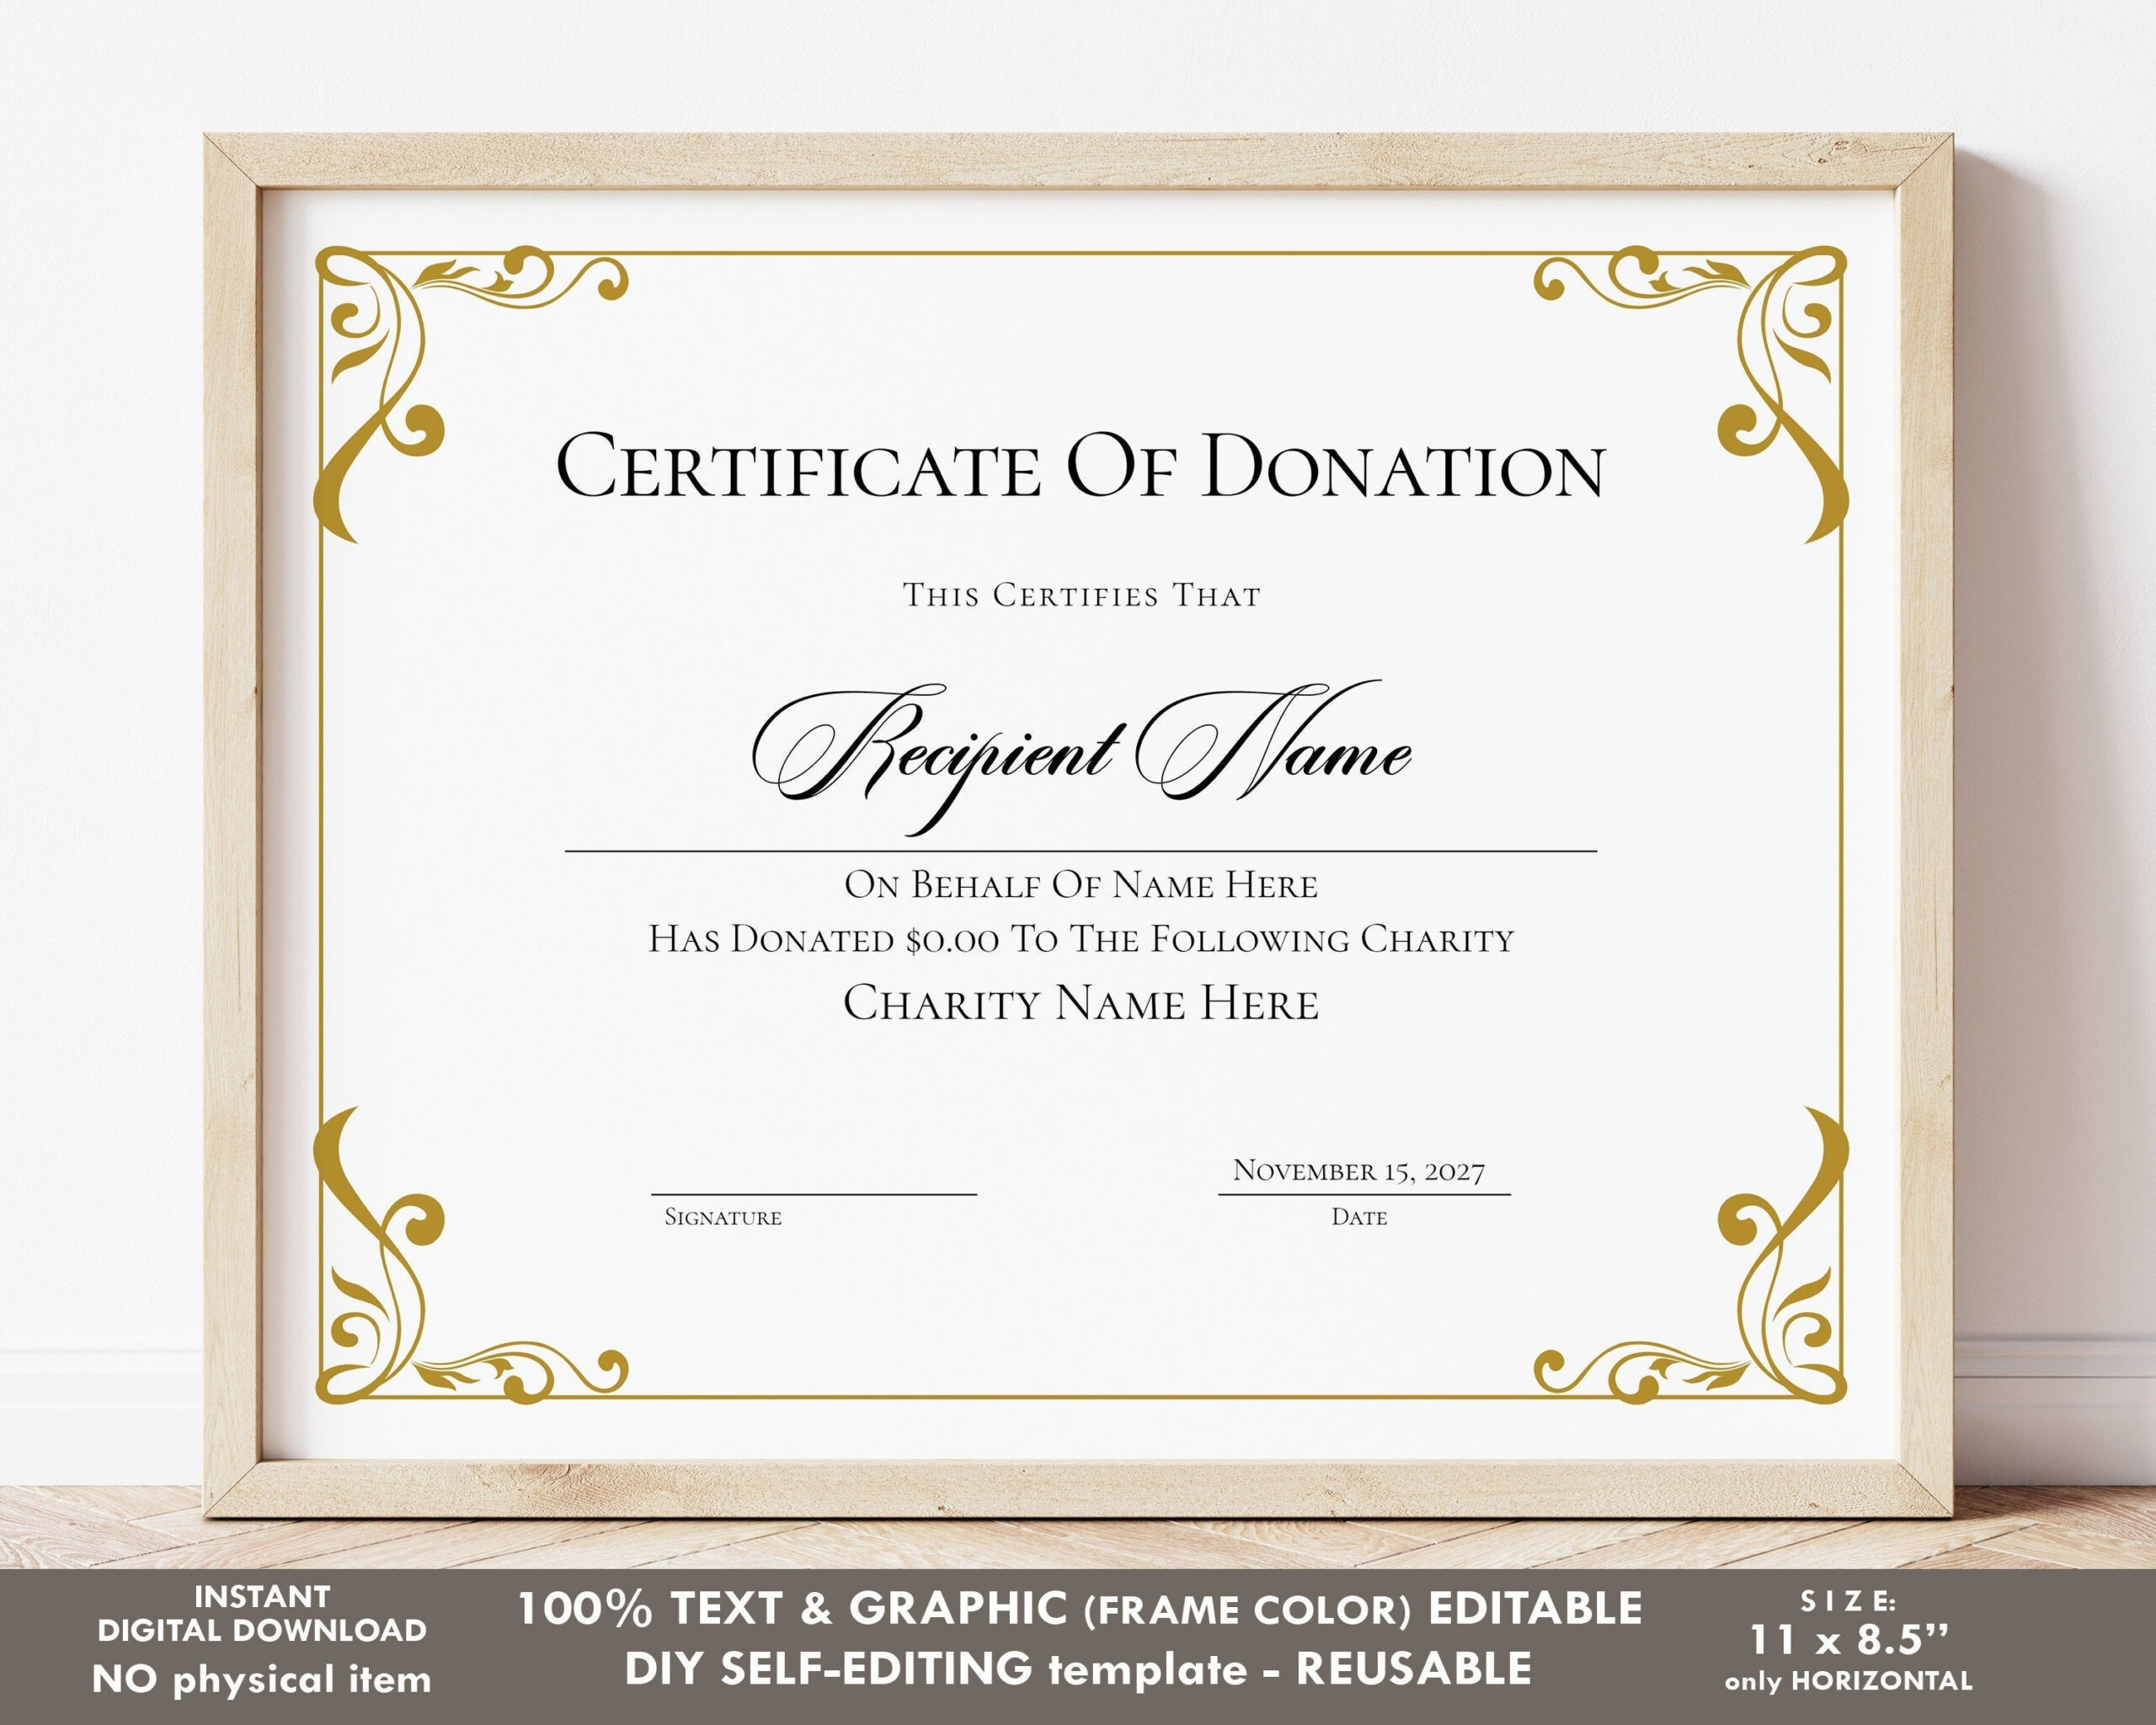 Editable Certificate of Donation Template Printable Charity - Etsy